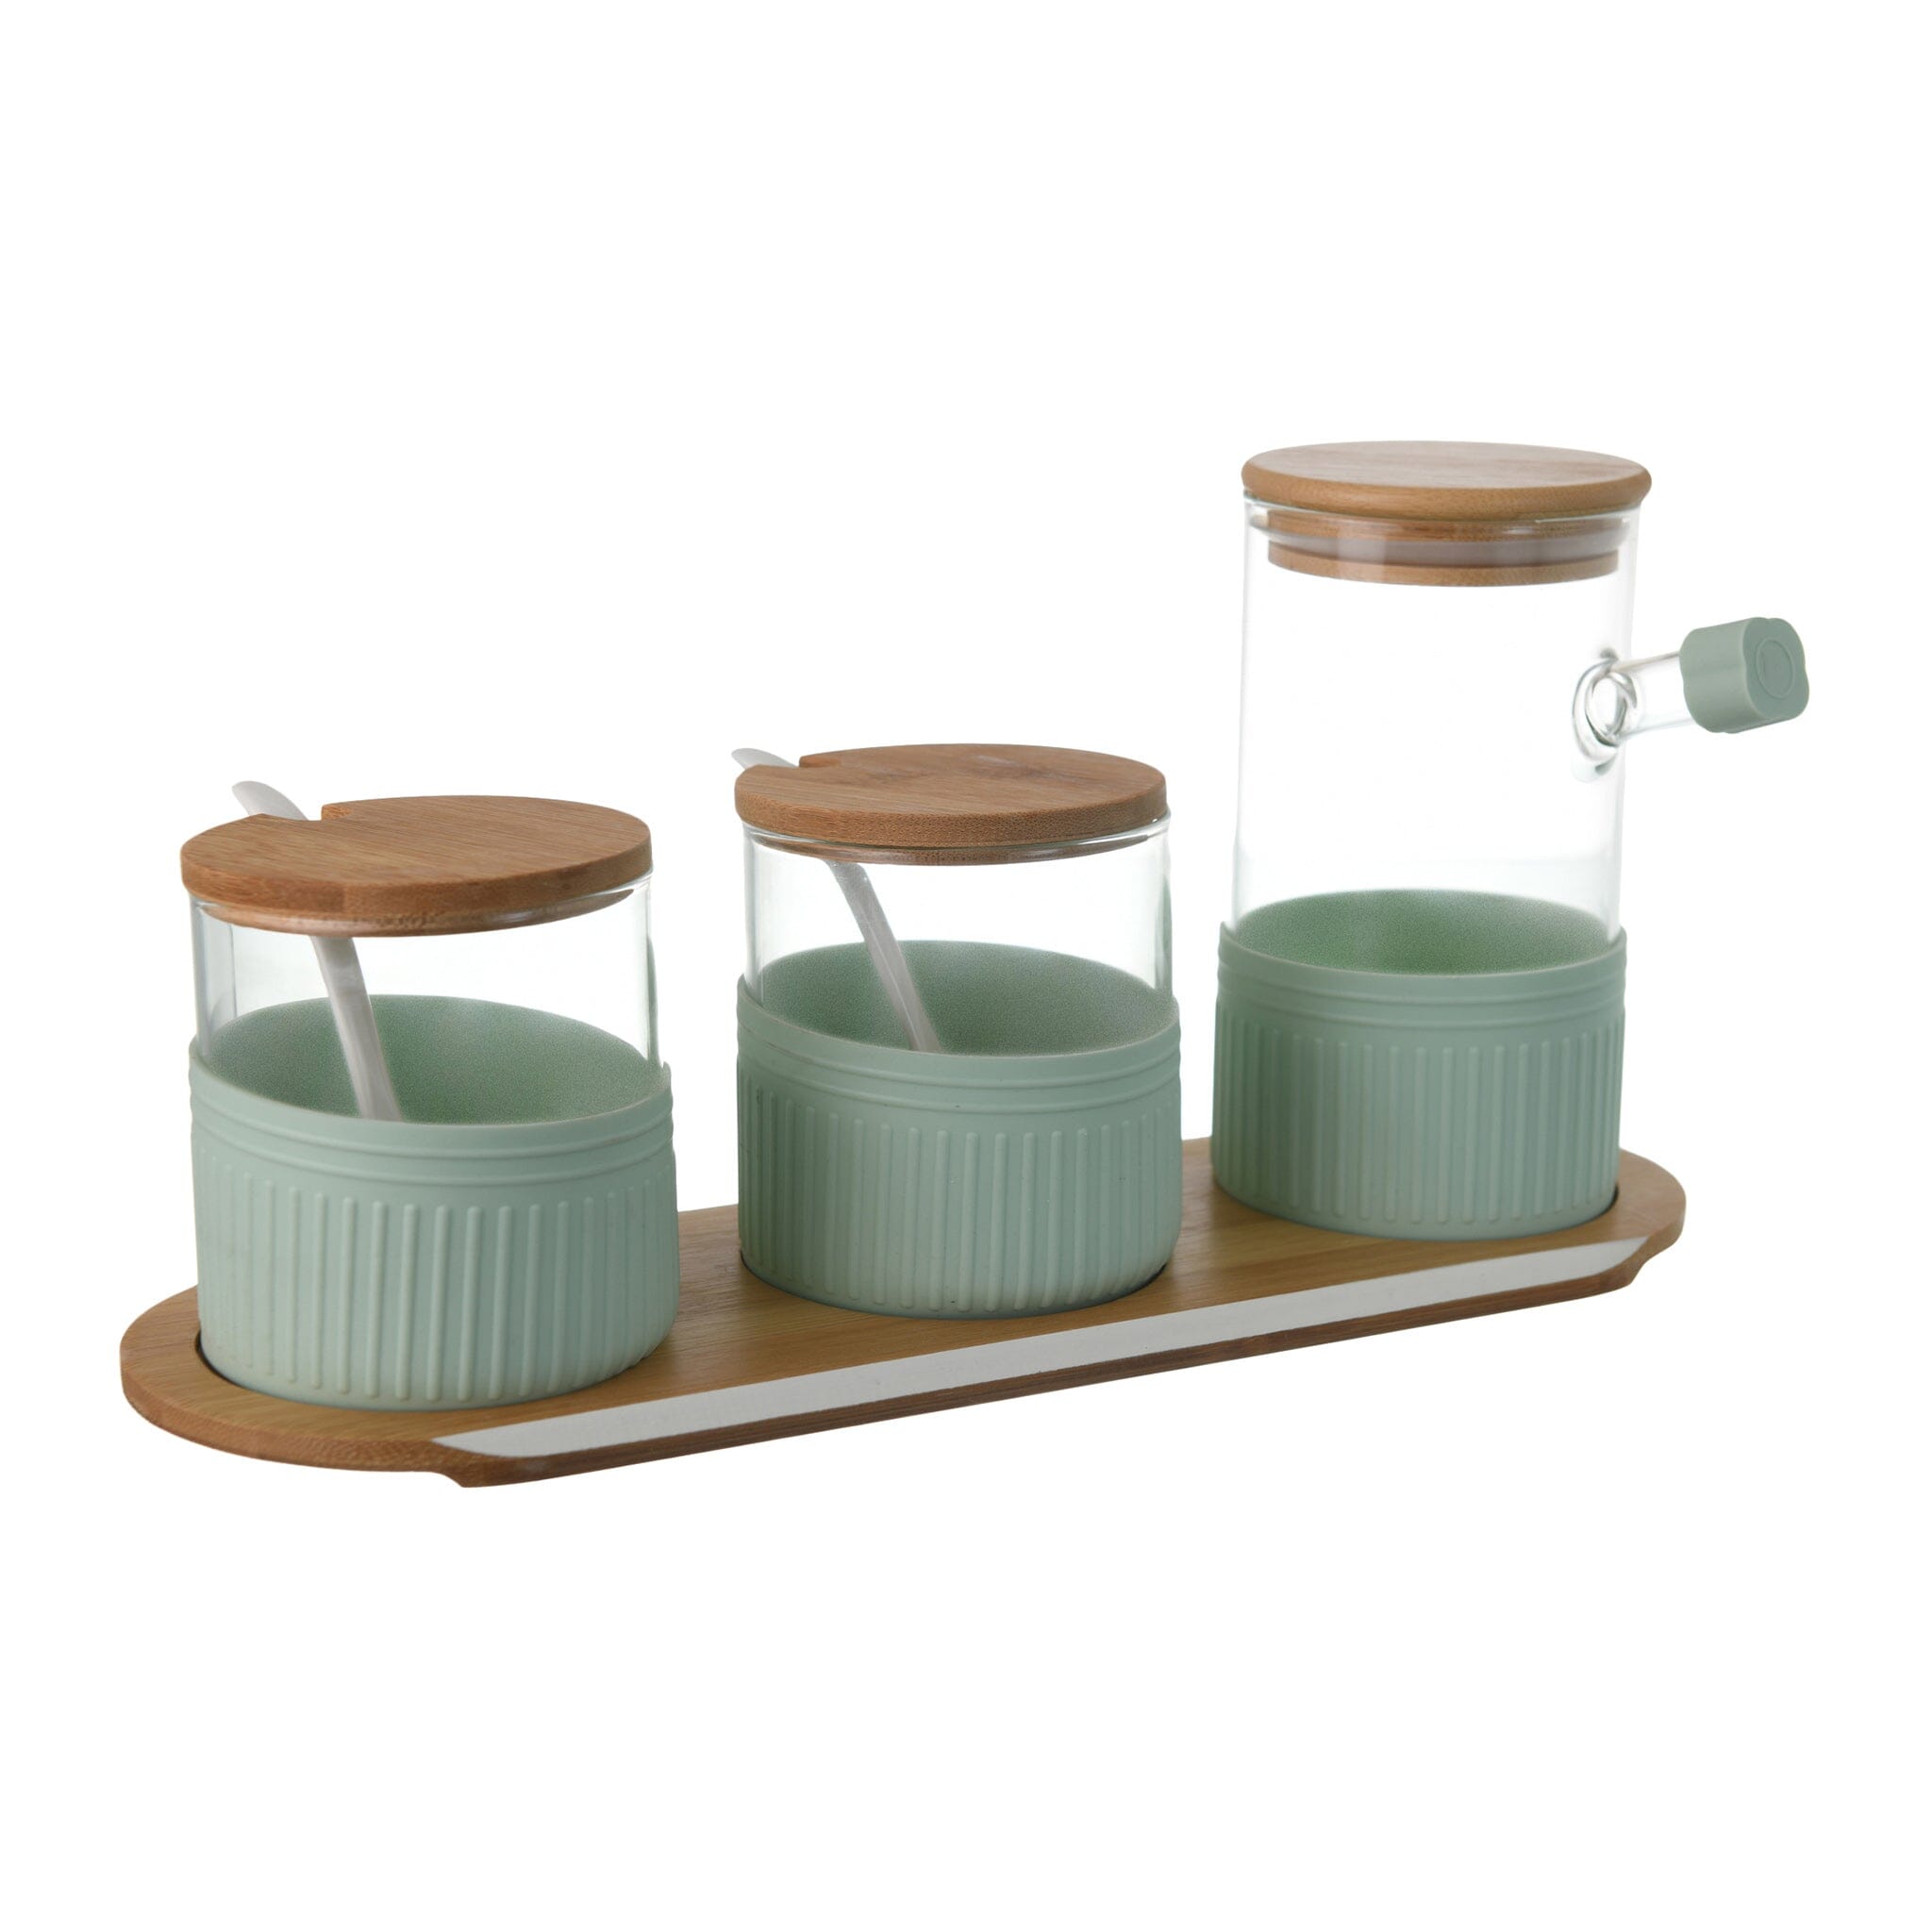 O'lala - Set of Wooden and Glass Spice Jars With Tray - Mint Green - 770008004